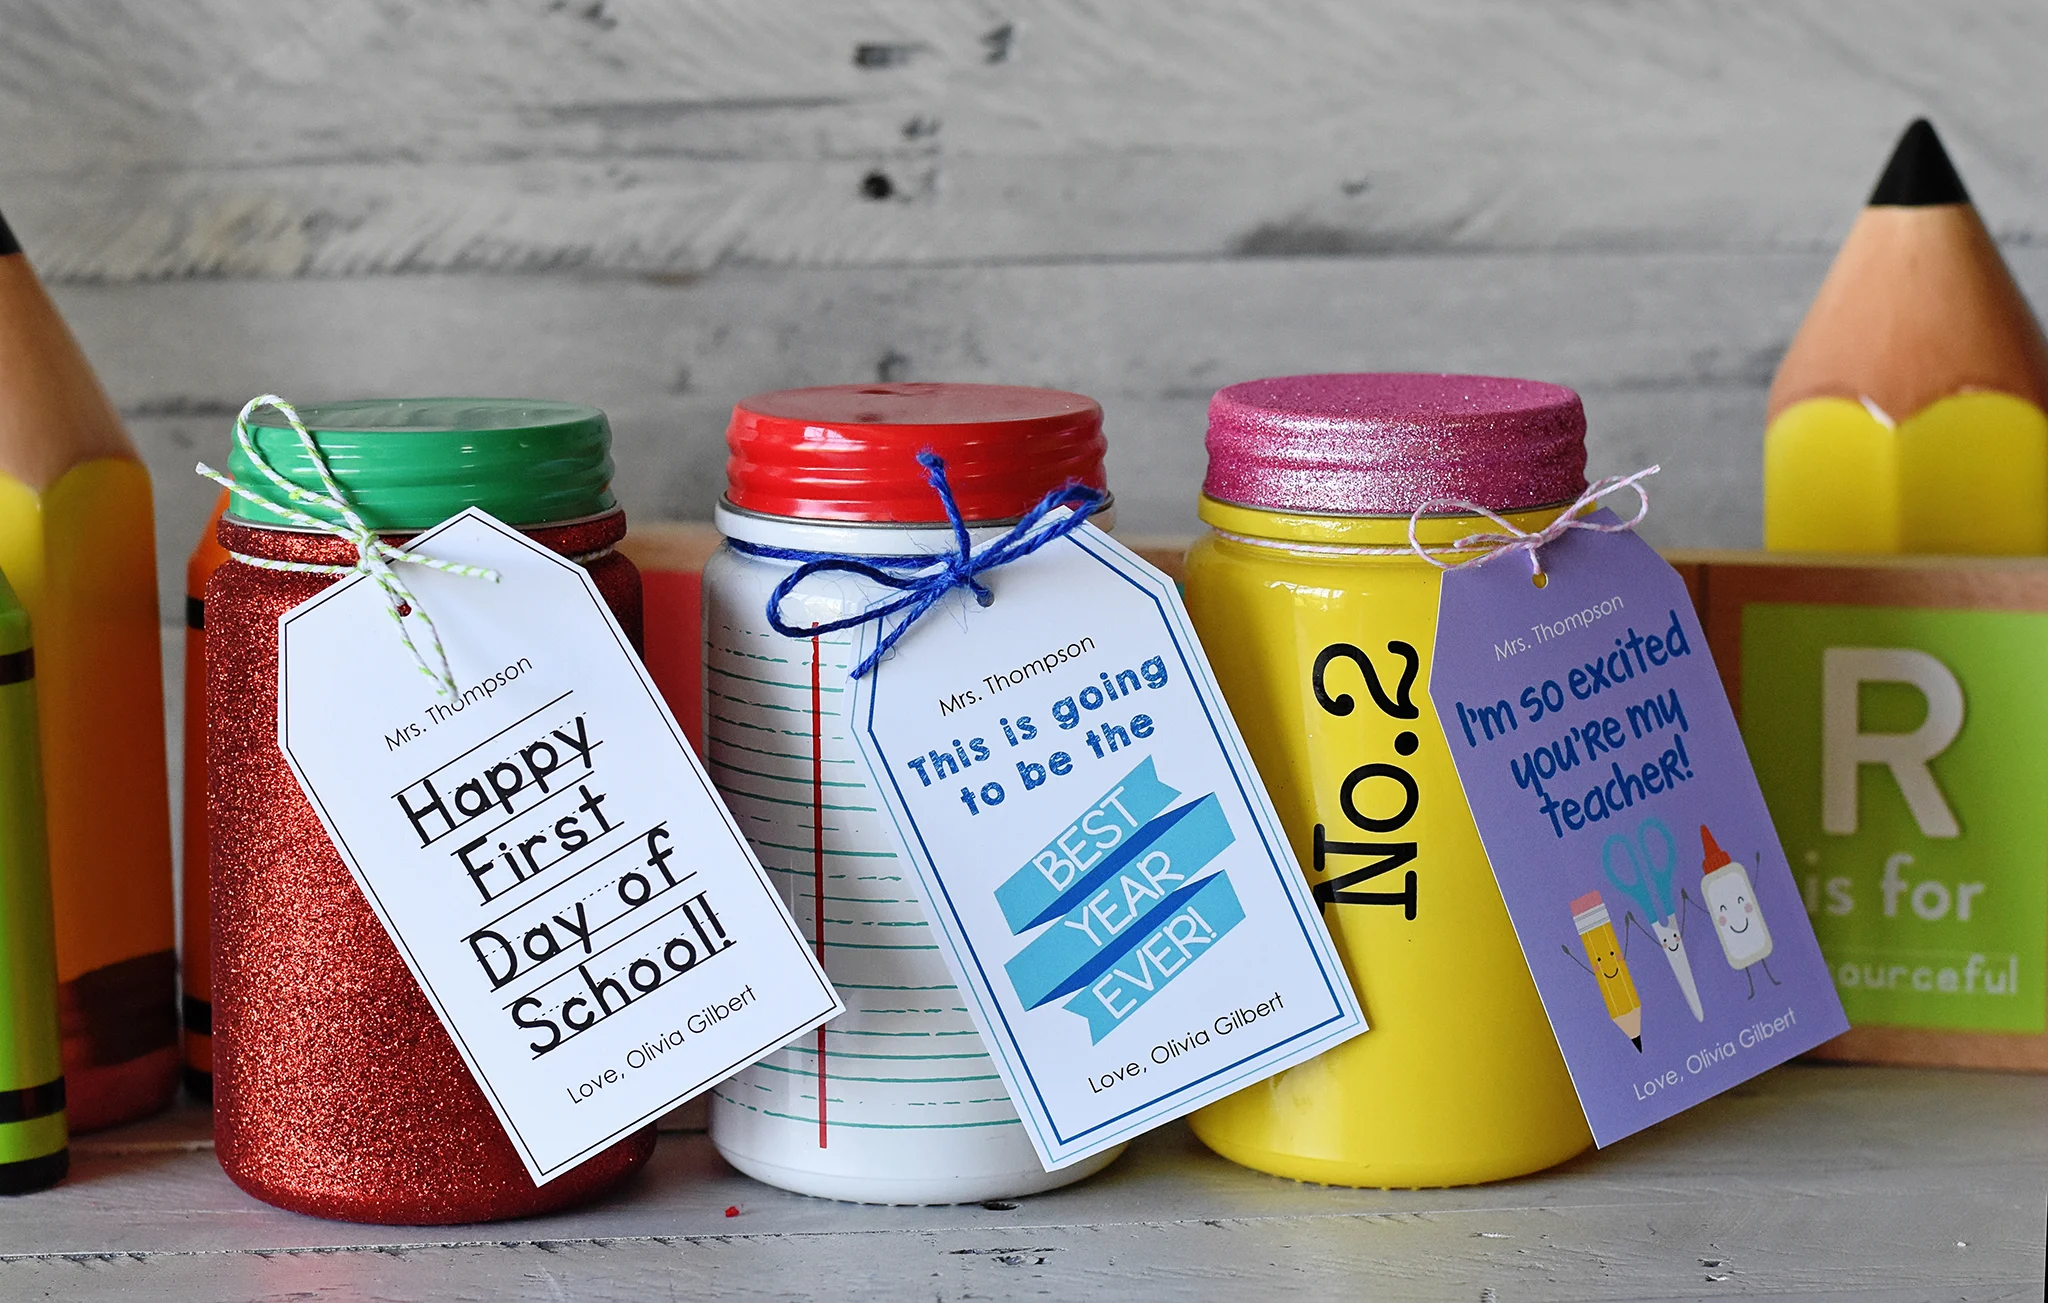 Happy First Day of School Gift Ideas!